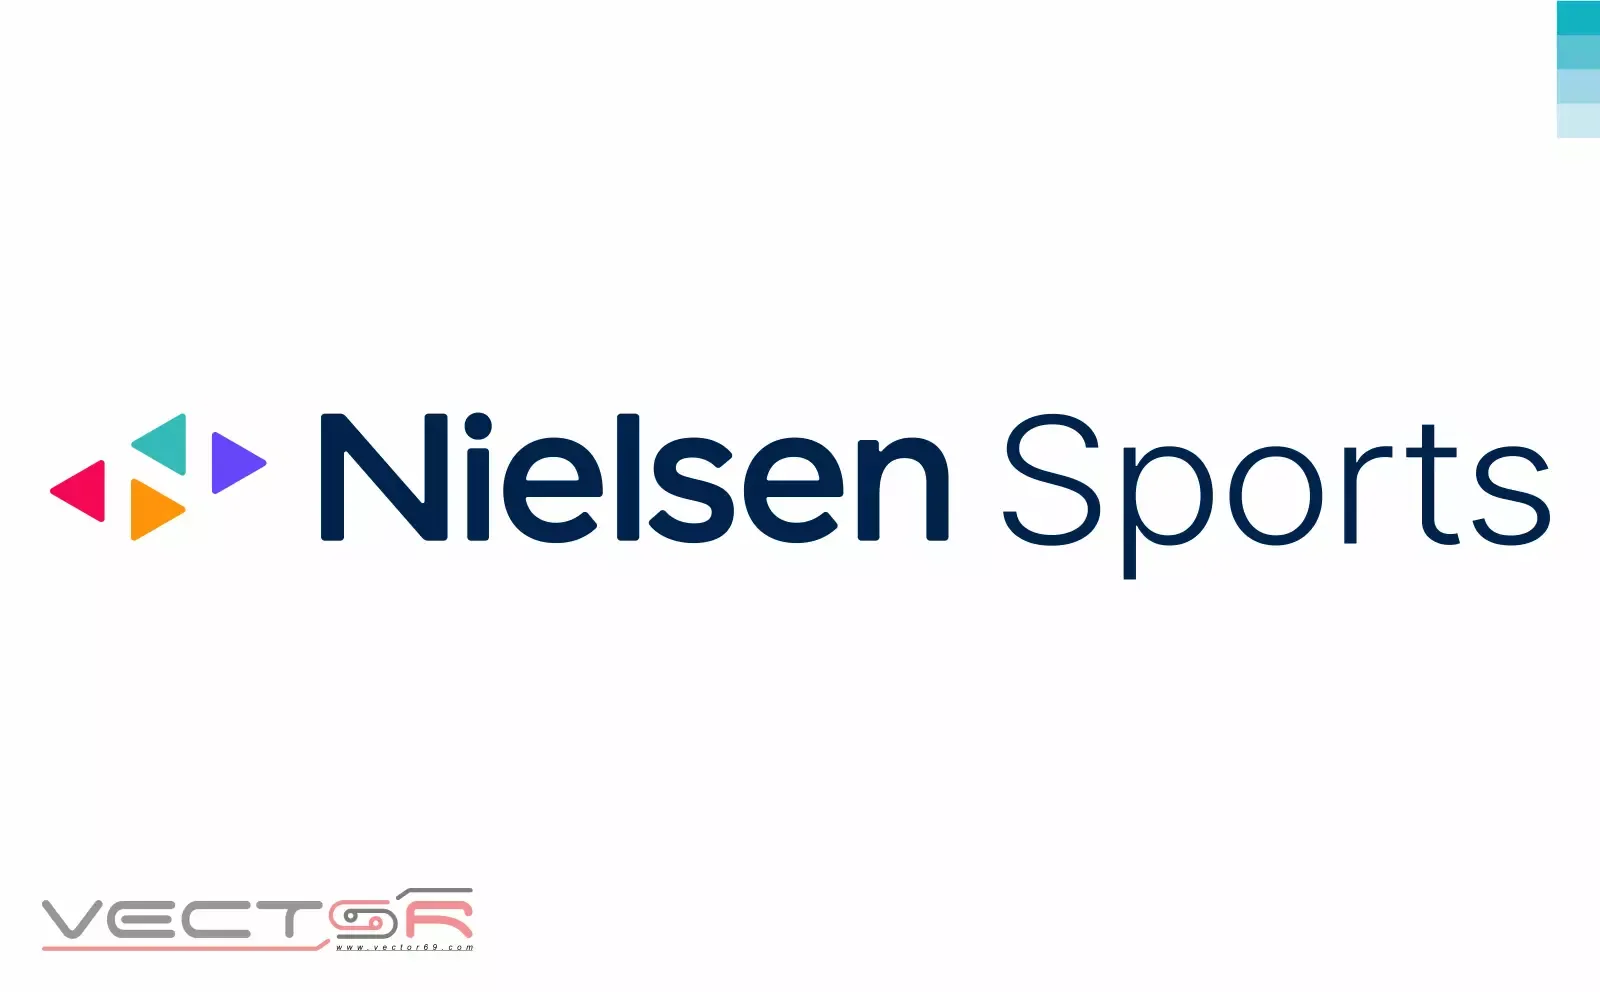 Nielsen Sports (2021) Logo - Download Vector File SVG (Scalable Vector Graphics)